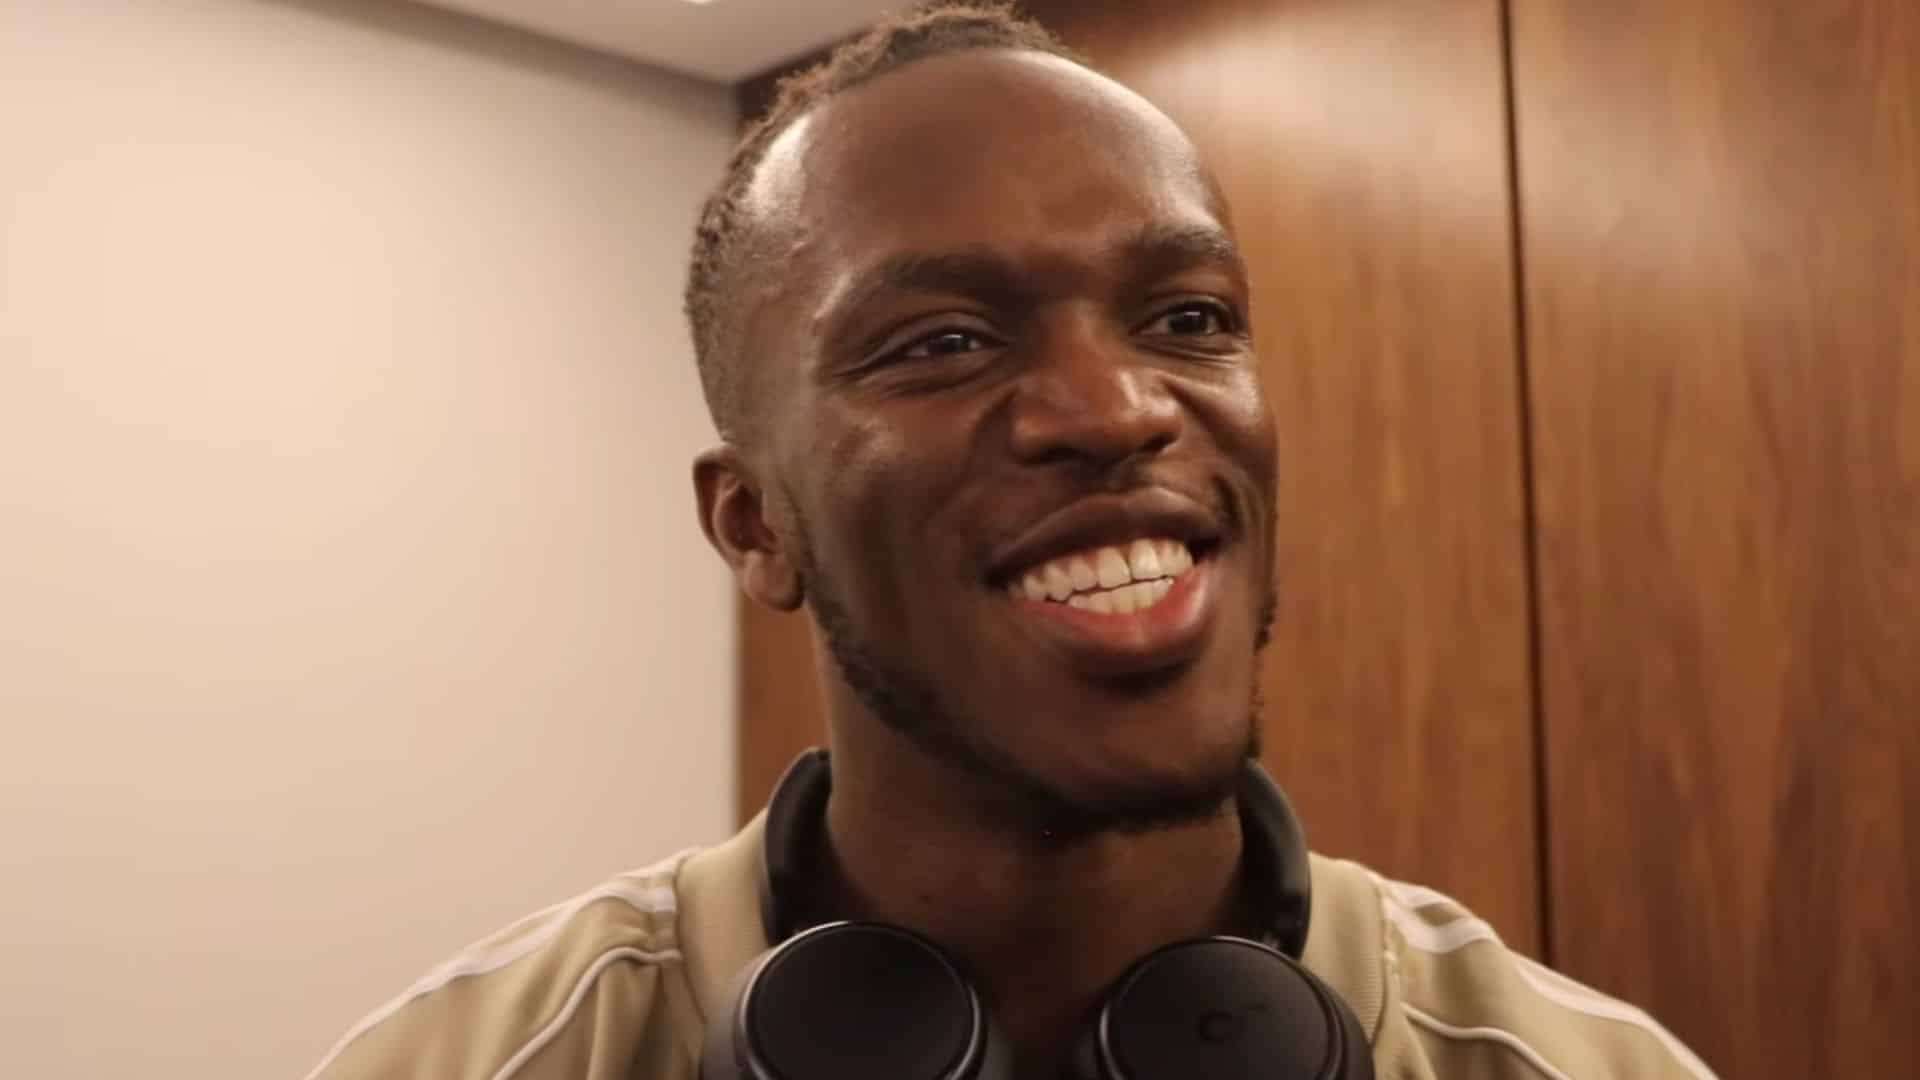 KSI smiling at camera in brown shirt and with headphones on